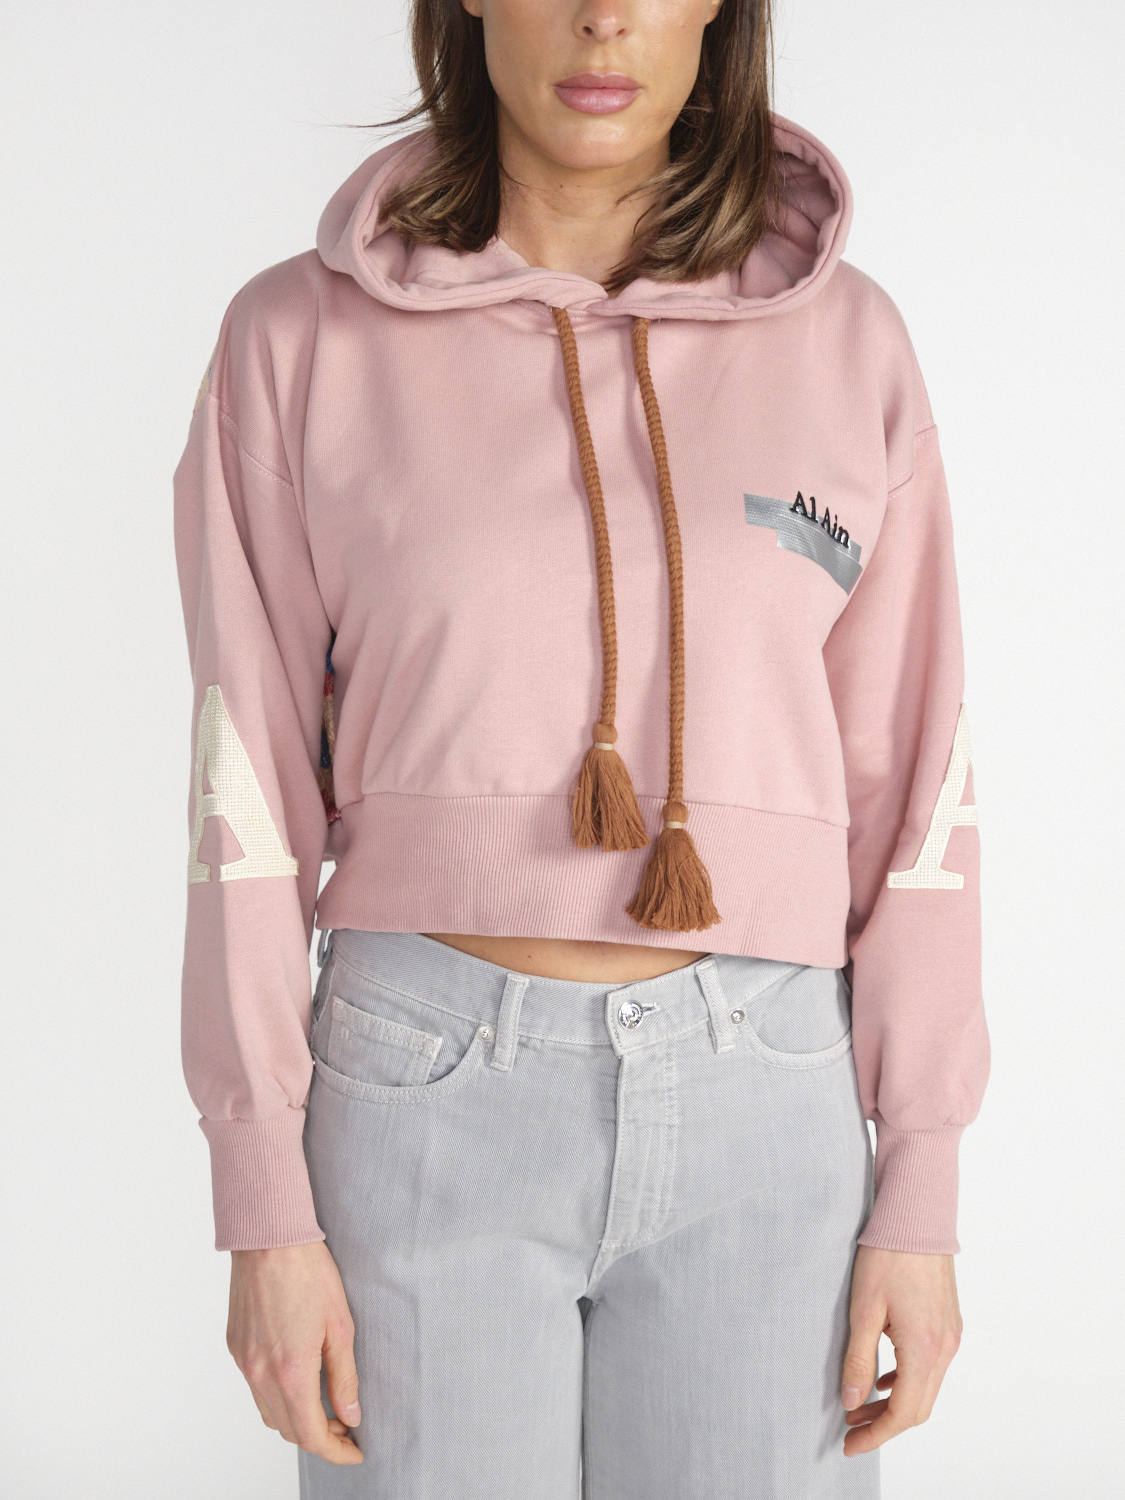 Al Ain Ahcx – Cropped Hoodie with pattern  rosa S/M